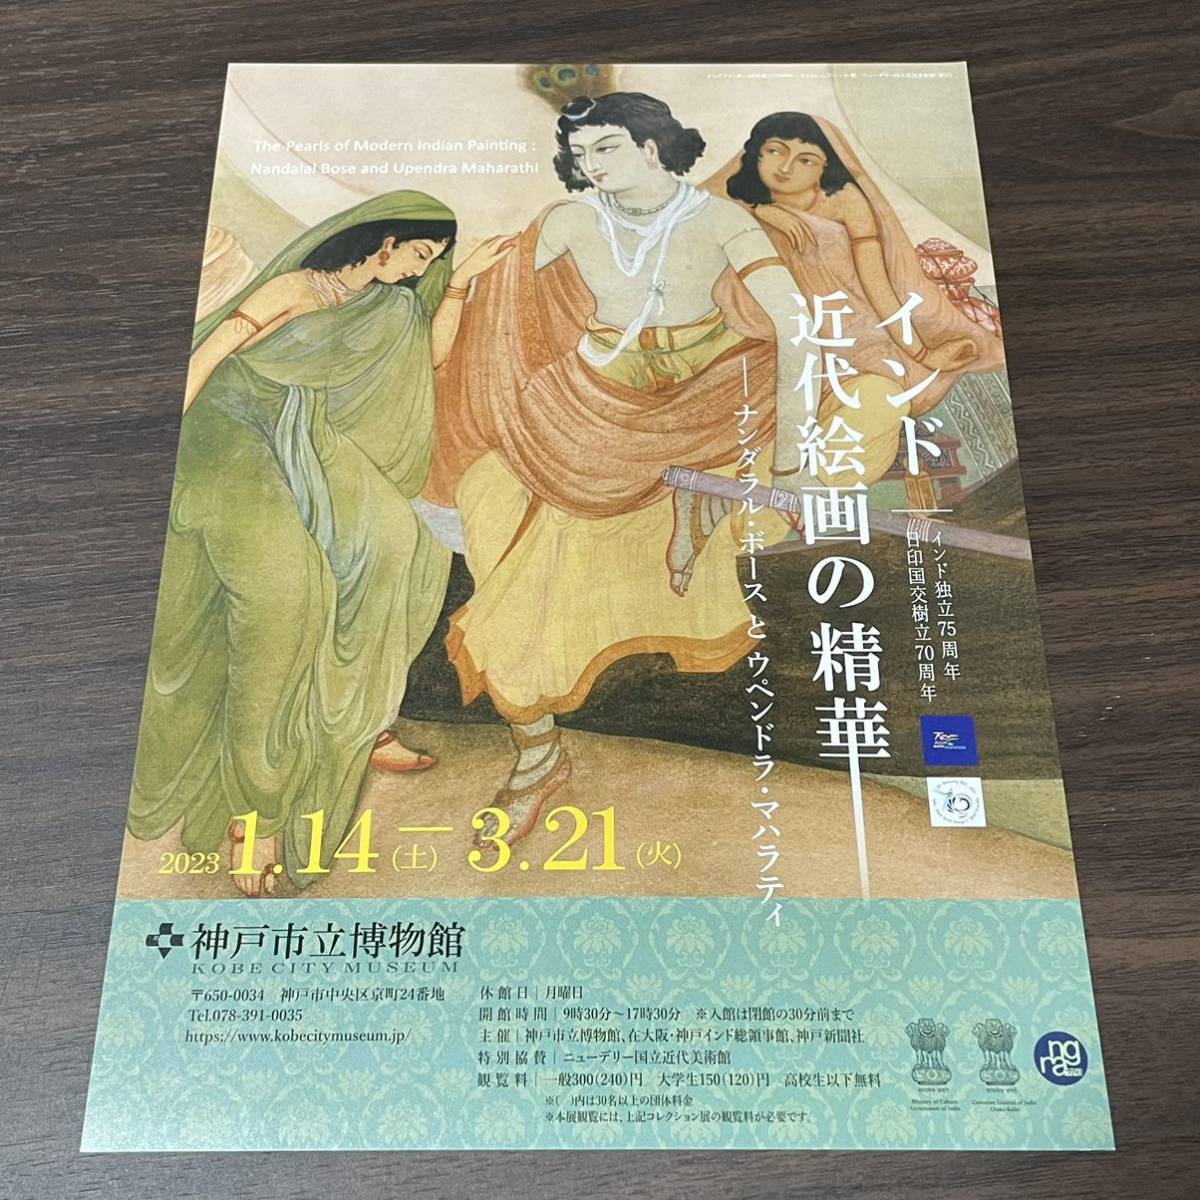 [The Essence of Modern Indian Painting - Nandalal Bose and Upendra Maharati] Kobe City Museum 2023 Exhibition Flyer, printed matter, Flyer, others